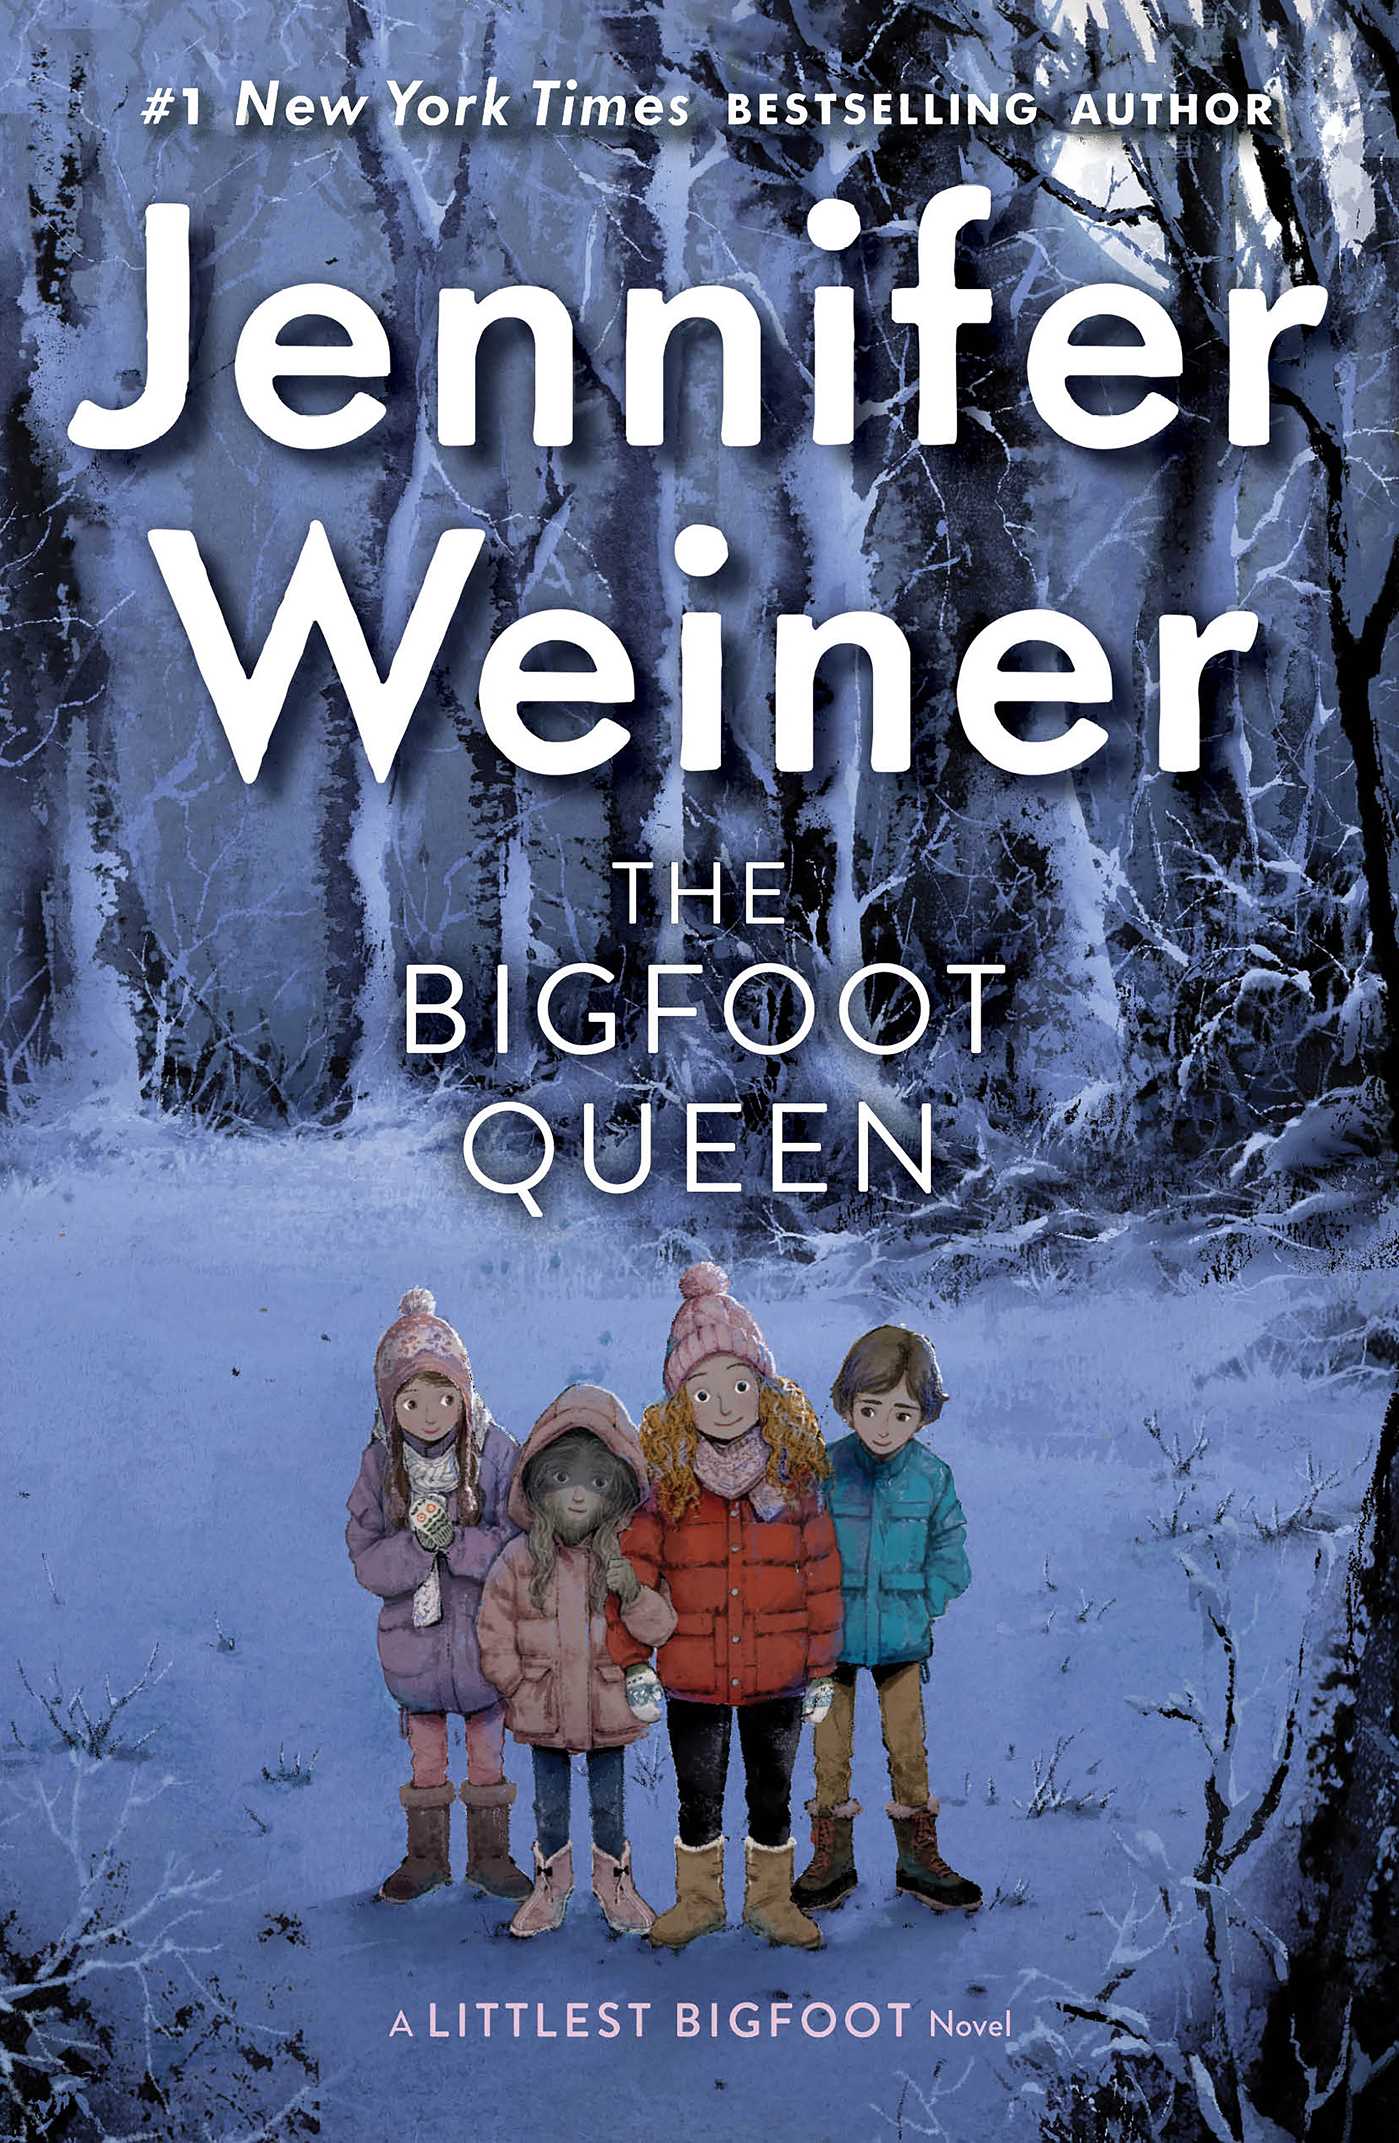 Image for "The Bigfoot Queen"